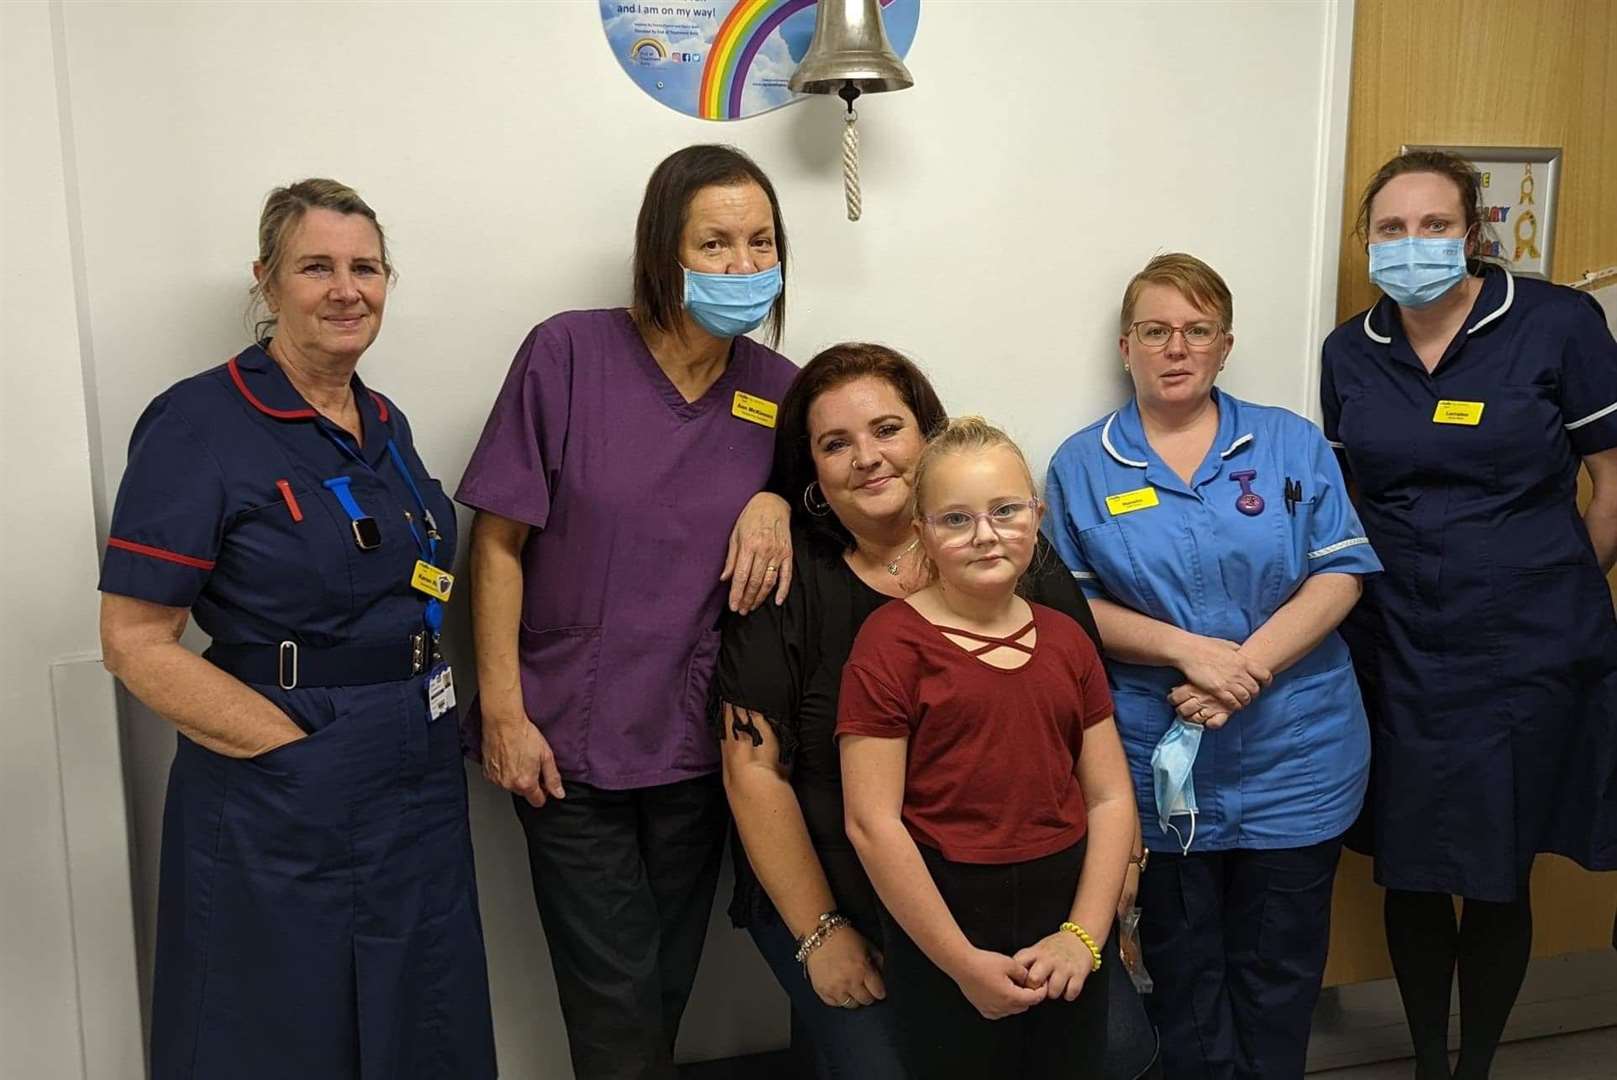 Ruby and her mum Vikki with members of staff at Medway Maritime Hospital